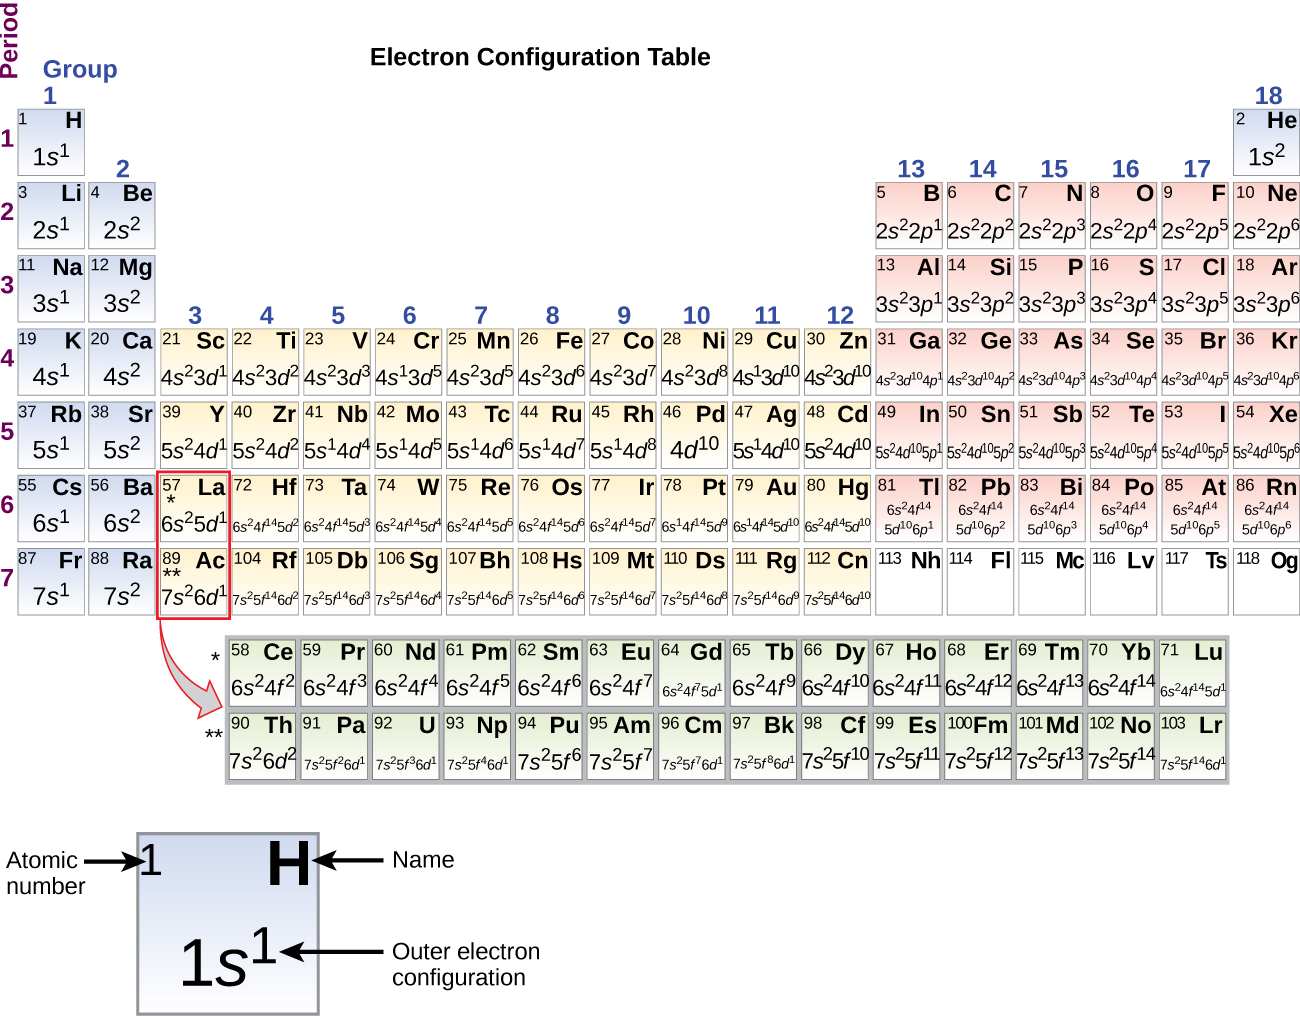 A periodic table, entitled, “Electron Configuration Table” is shown. The table includes the outer electron configuration information, atomic numbers, and element symbols for all elements. A square for the element hydrogen is pulled out beneath the table to provide detail. The blue shaded square includes the atomic number in the upper left corner, which is 1; the element symbol, H, in the upper right corner; and the outer electron configuration in the lower, central portion of the square. For H, this is 1s superscript 1.